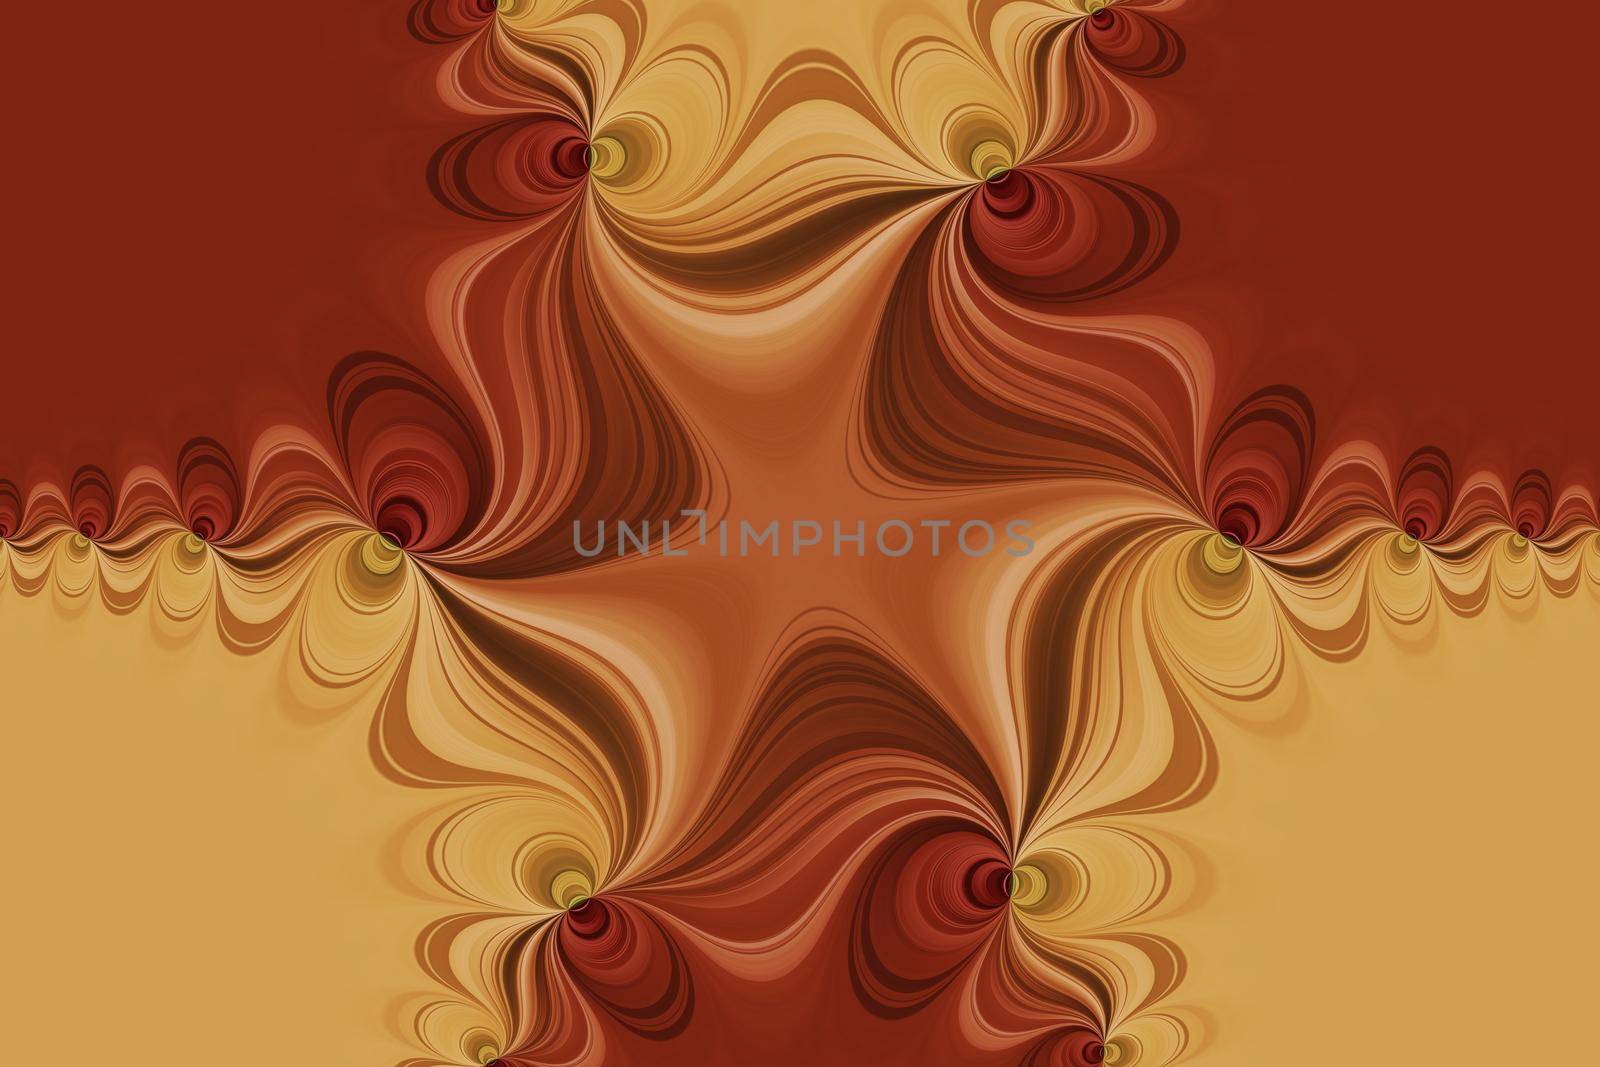 Red, orange and yellow curved lines with kaleidoscopic effect, abstract decorative background, seamless pattern